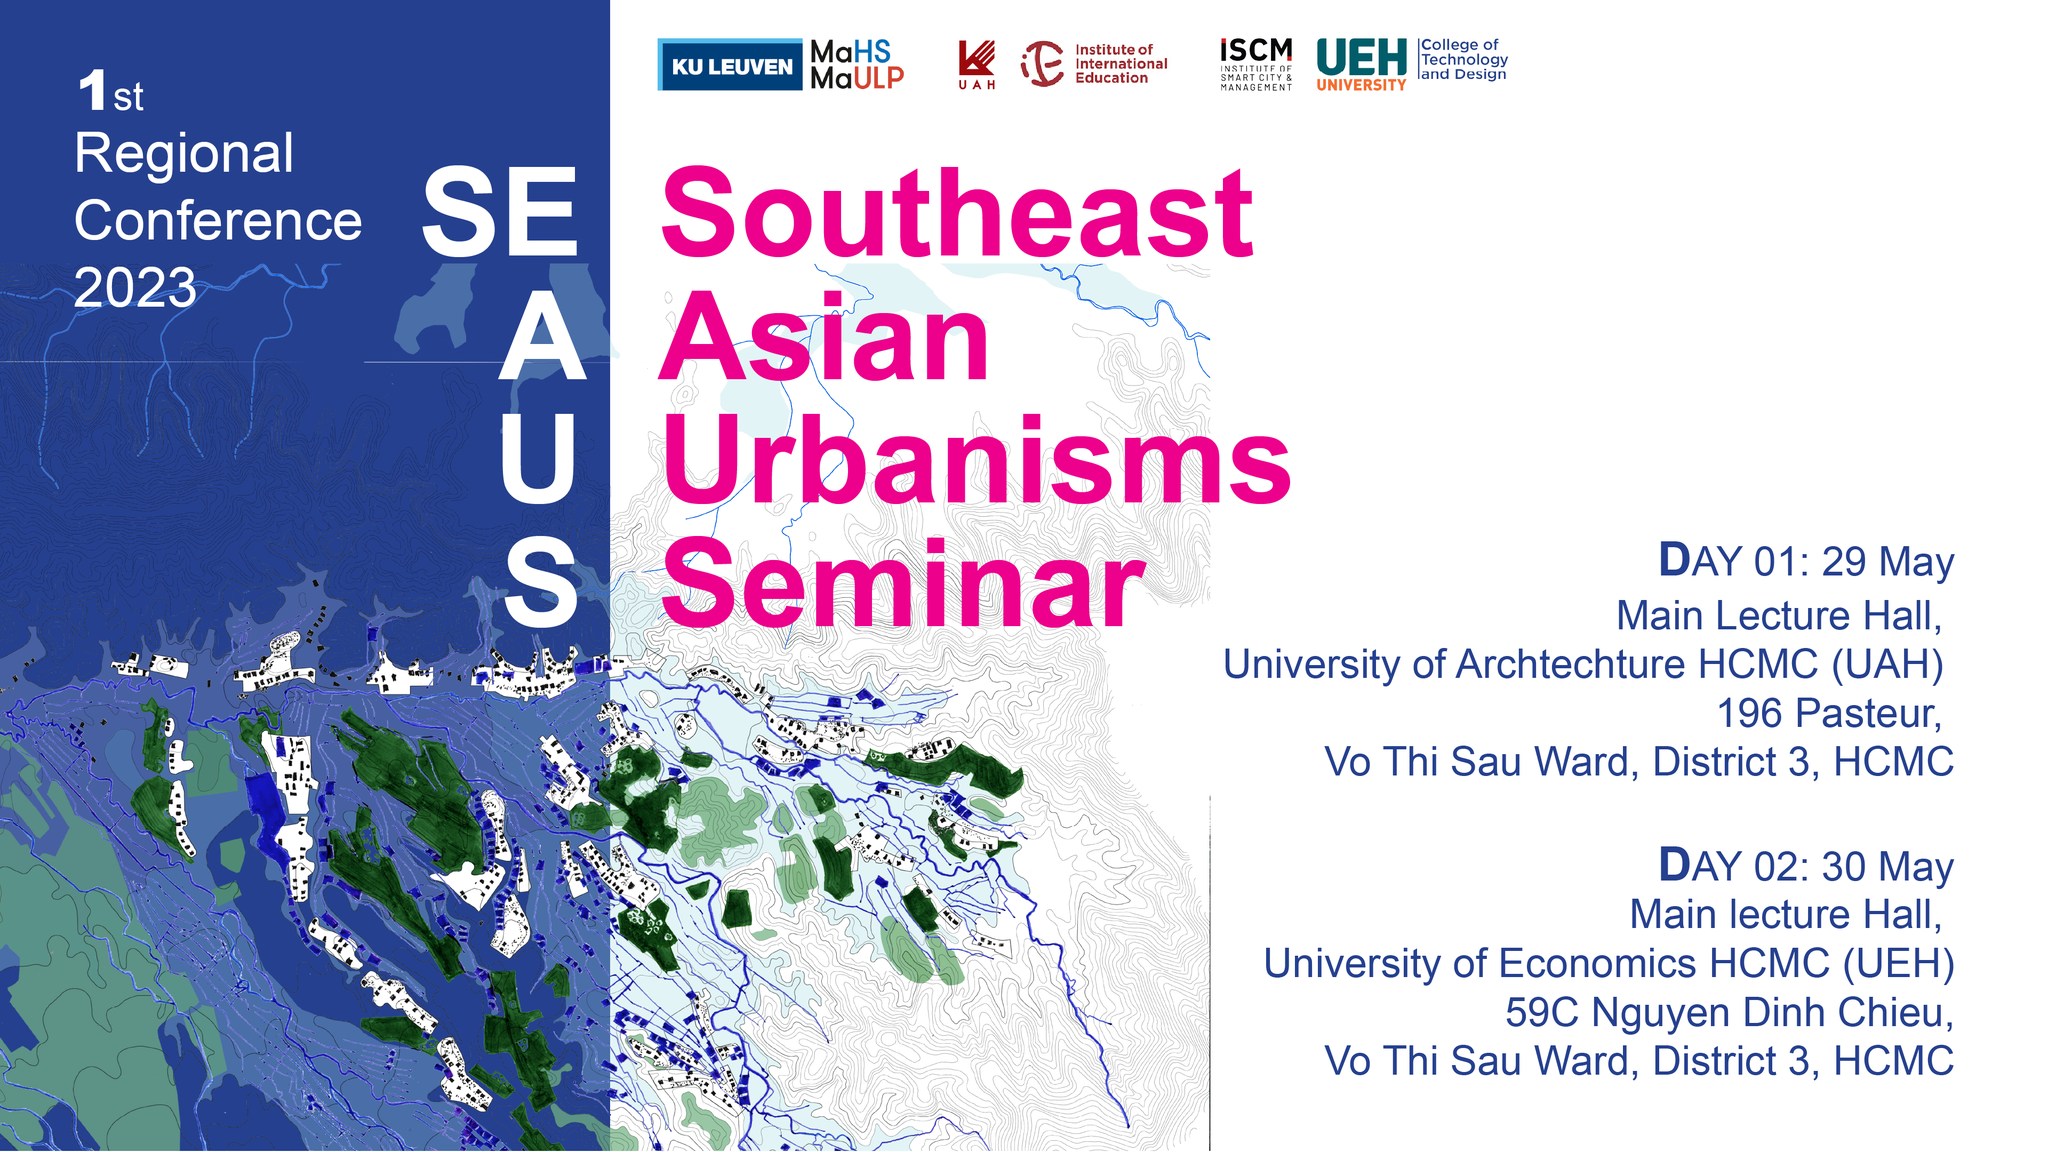 JOIN US AT THE 1st REGIONAL CONFERENCE: SOUTH EAST ASIAN URBANISMS TO ADDRESS GLOBAL WARMING